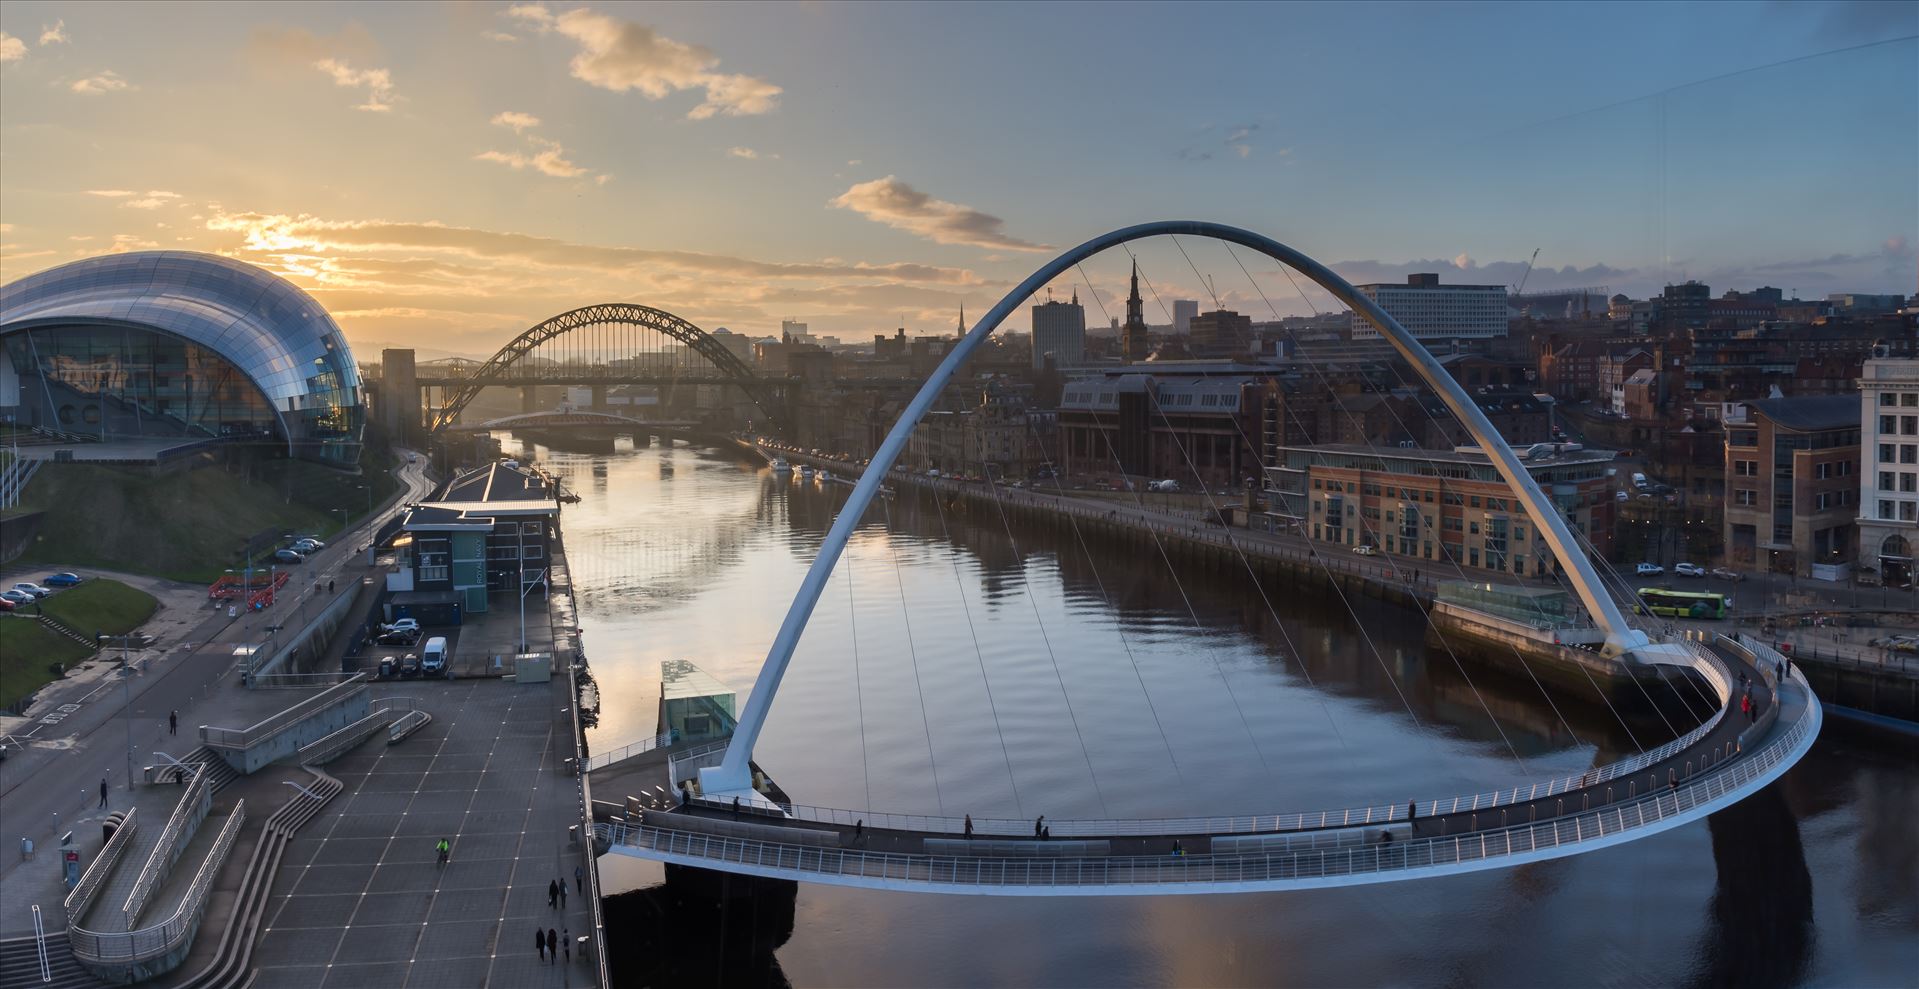 Gateshead & Newcastle quaysides at sunset - Taken from the viewing platform on level 4 of the Baltic arts building. This photo is made from 3 separate images stitched together to make this panoramic shot. by philreay